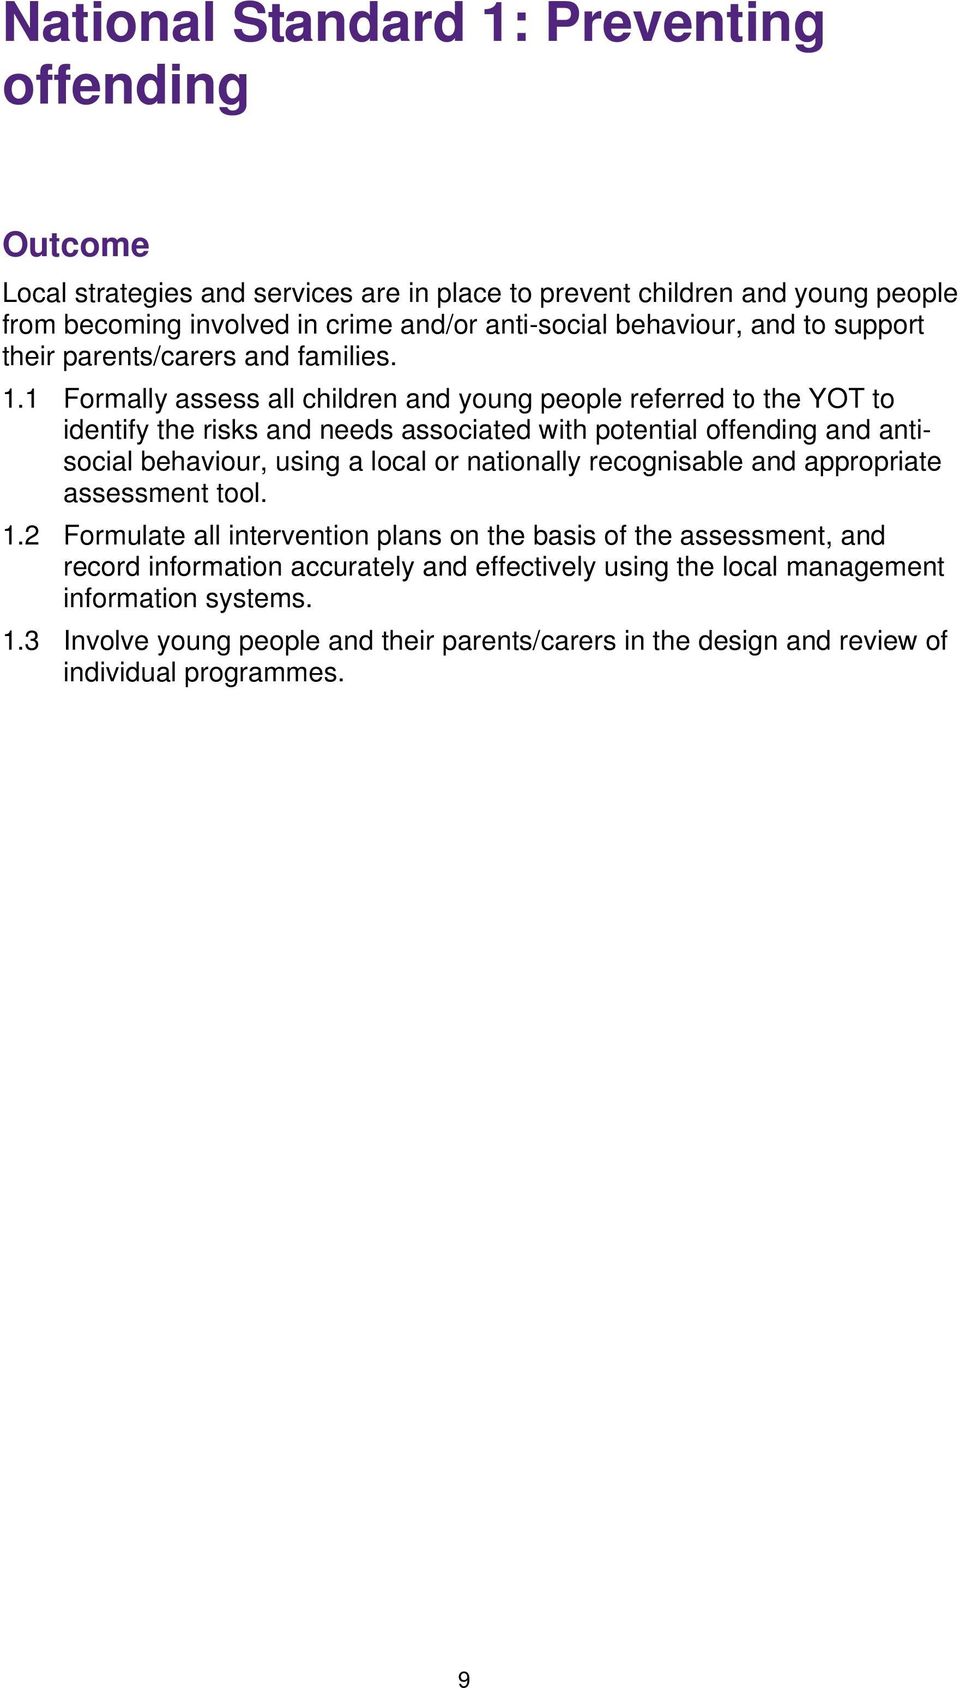 1 Formally assess all children and young people referred to the YOT to identify the risks and needs associated with potential offending and antisocial behaviour, using a local or